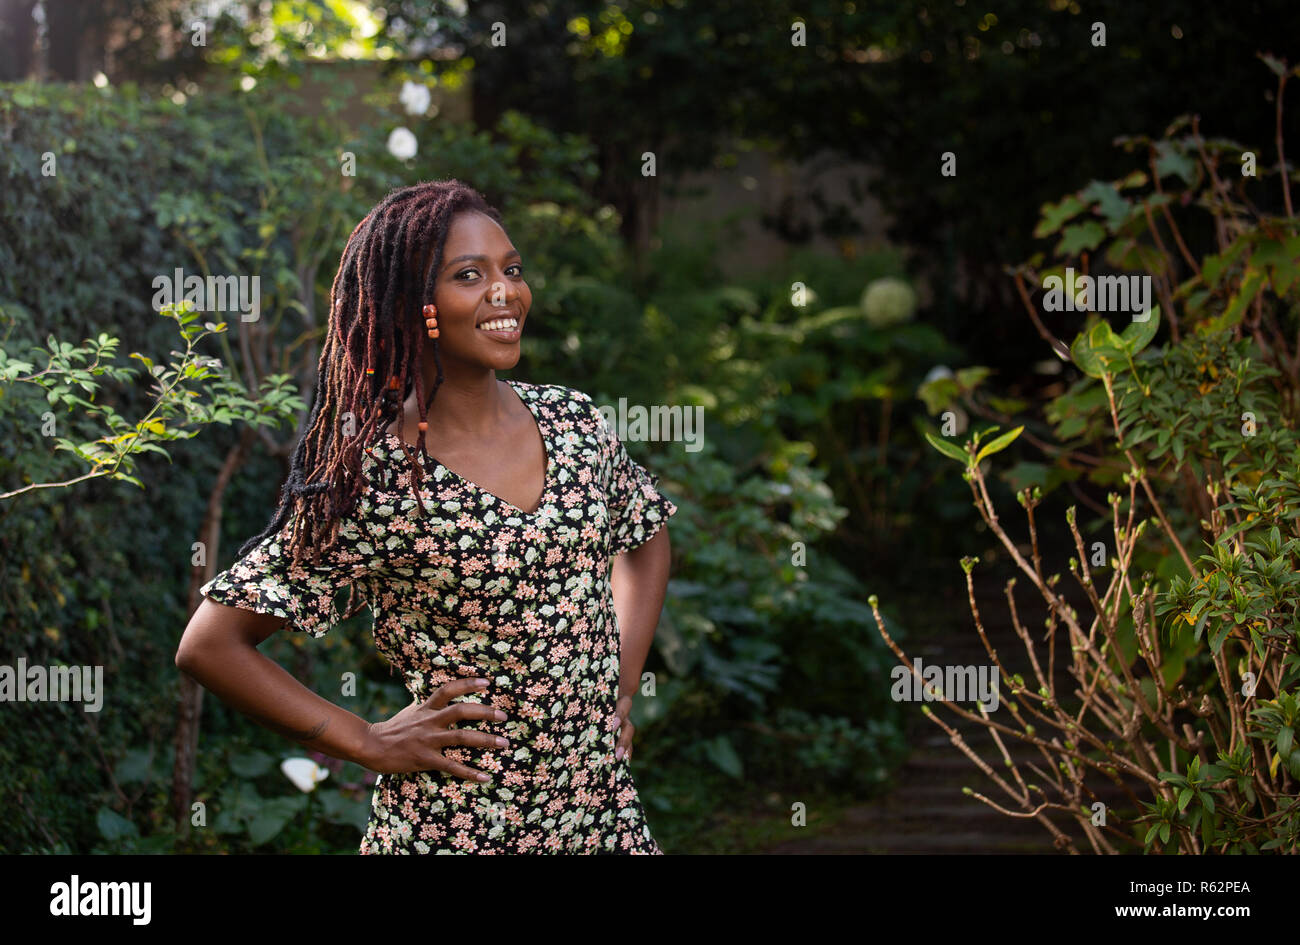 An African woman standing in a garden Stock Photo - Alamy